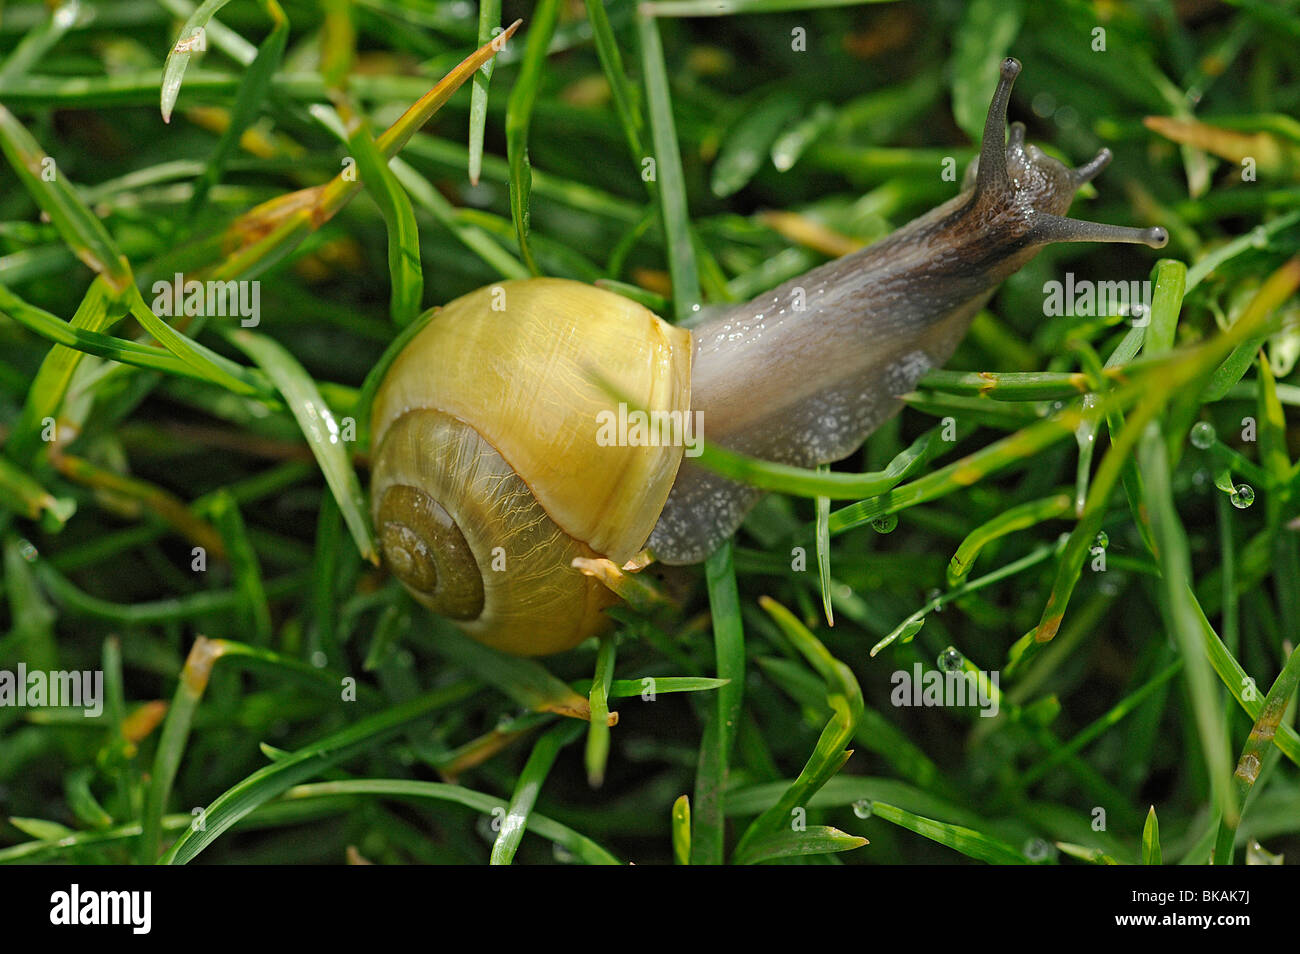 Snail, Cepaea hortensis, crawling at dawn over lawn with water drops extruded from grass Stock Photo